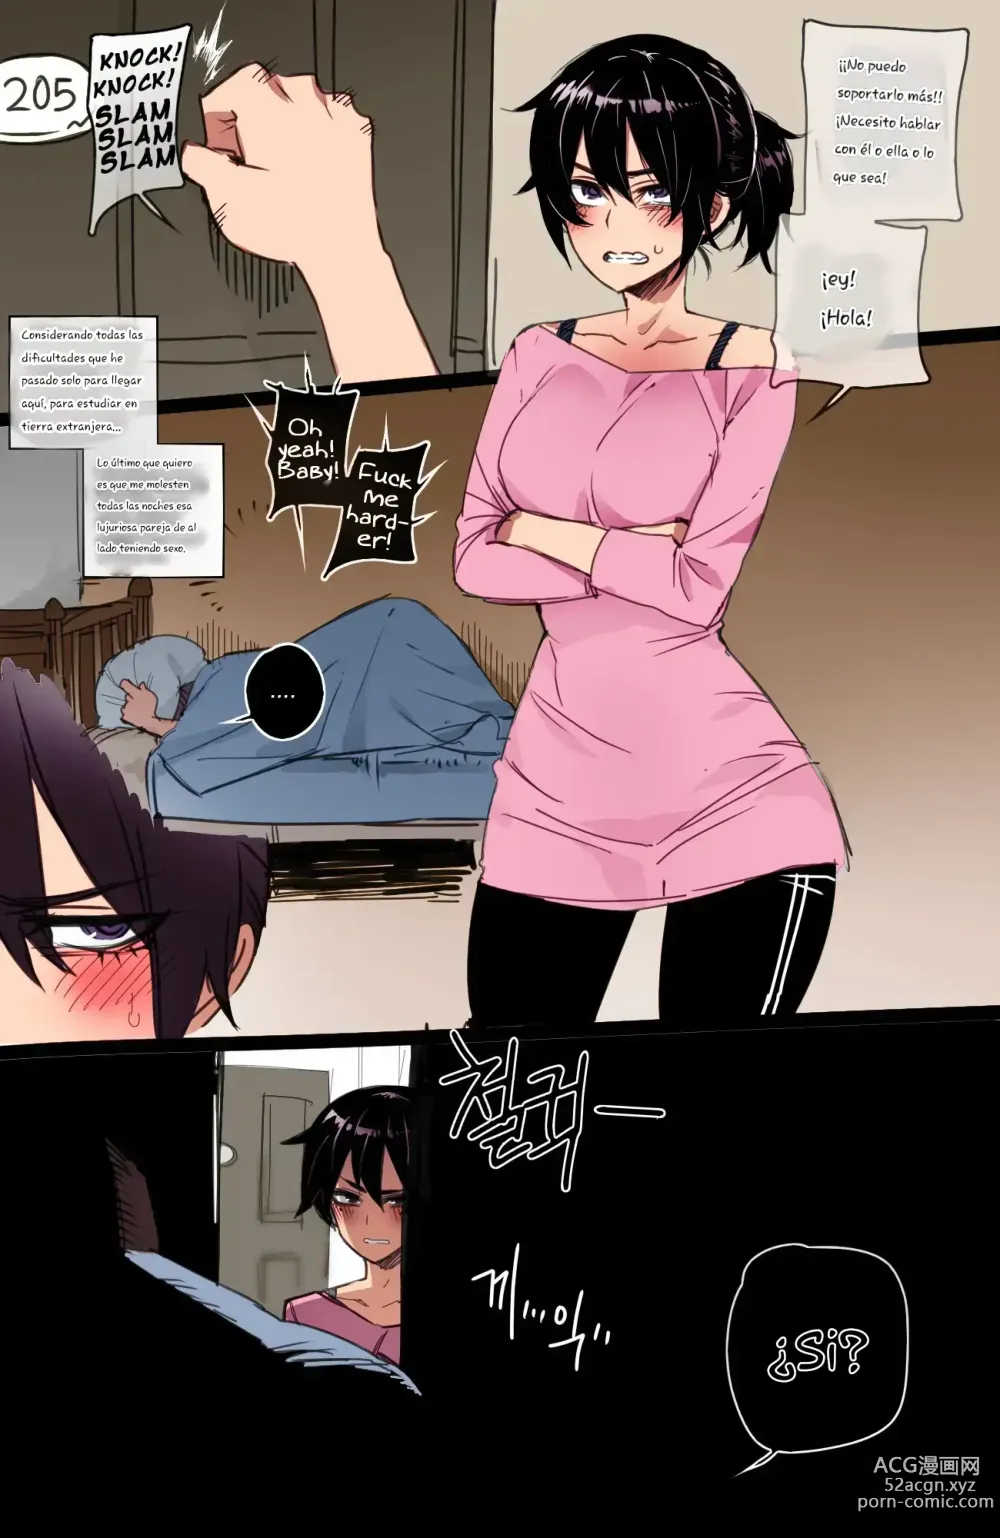 Page 1 of doujinshi Korean girl in america + monther and daugther BCC corruption